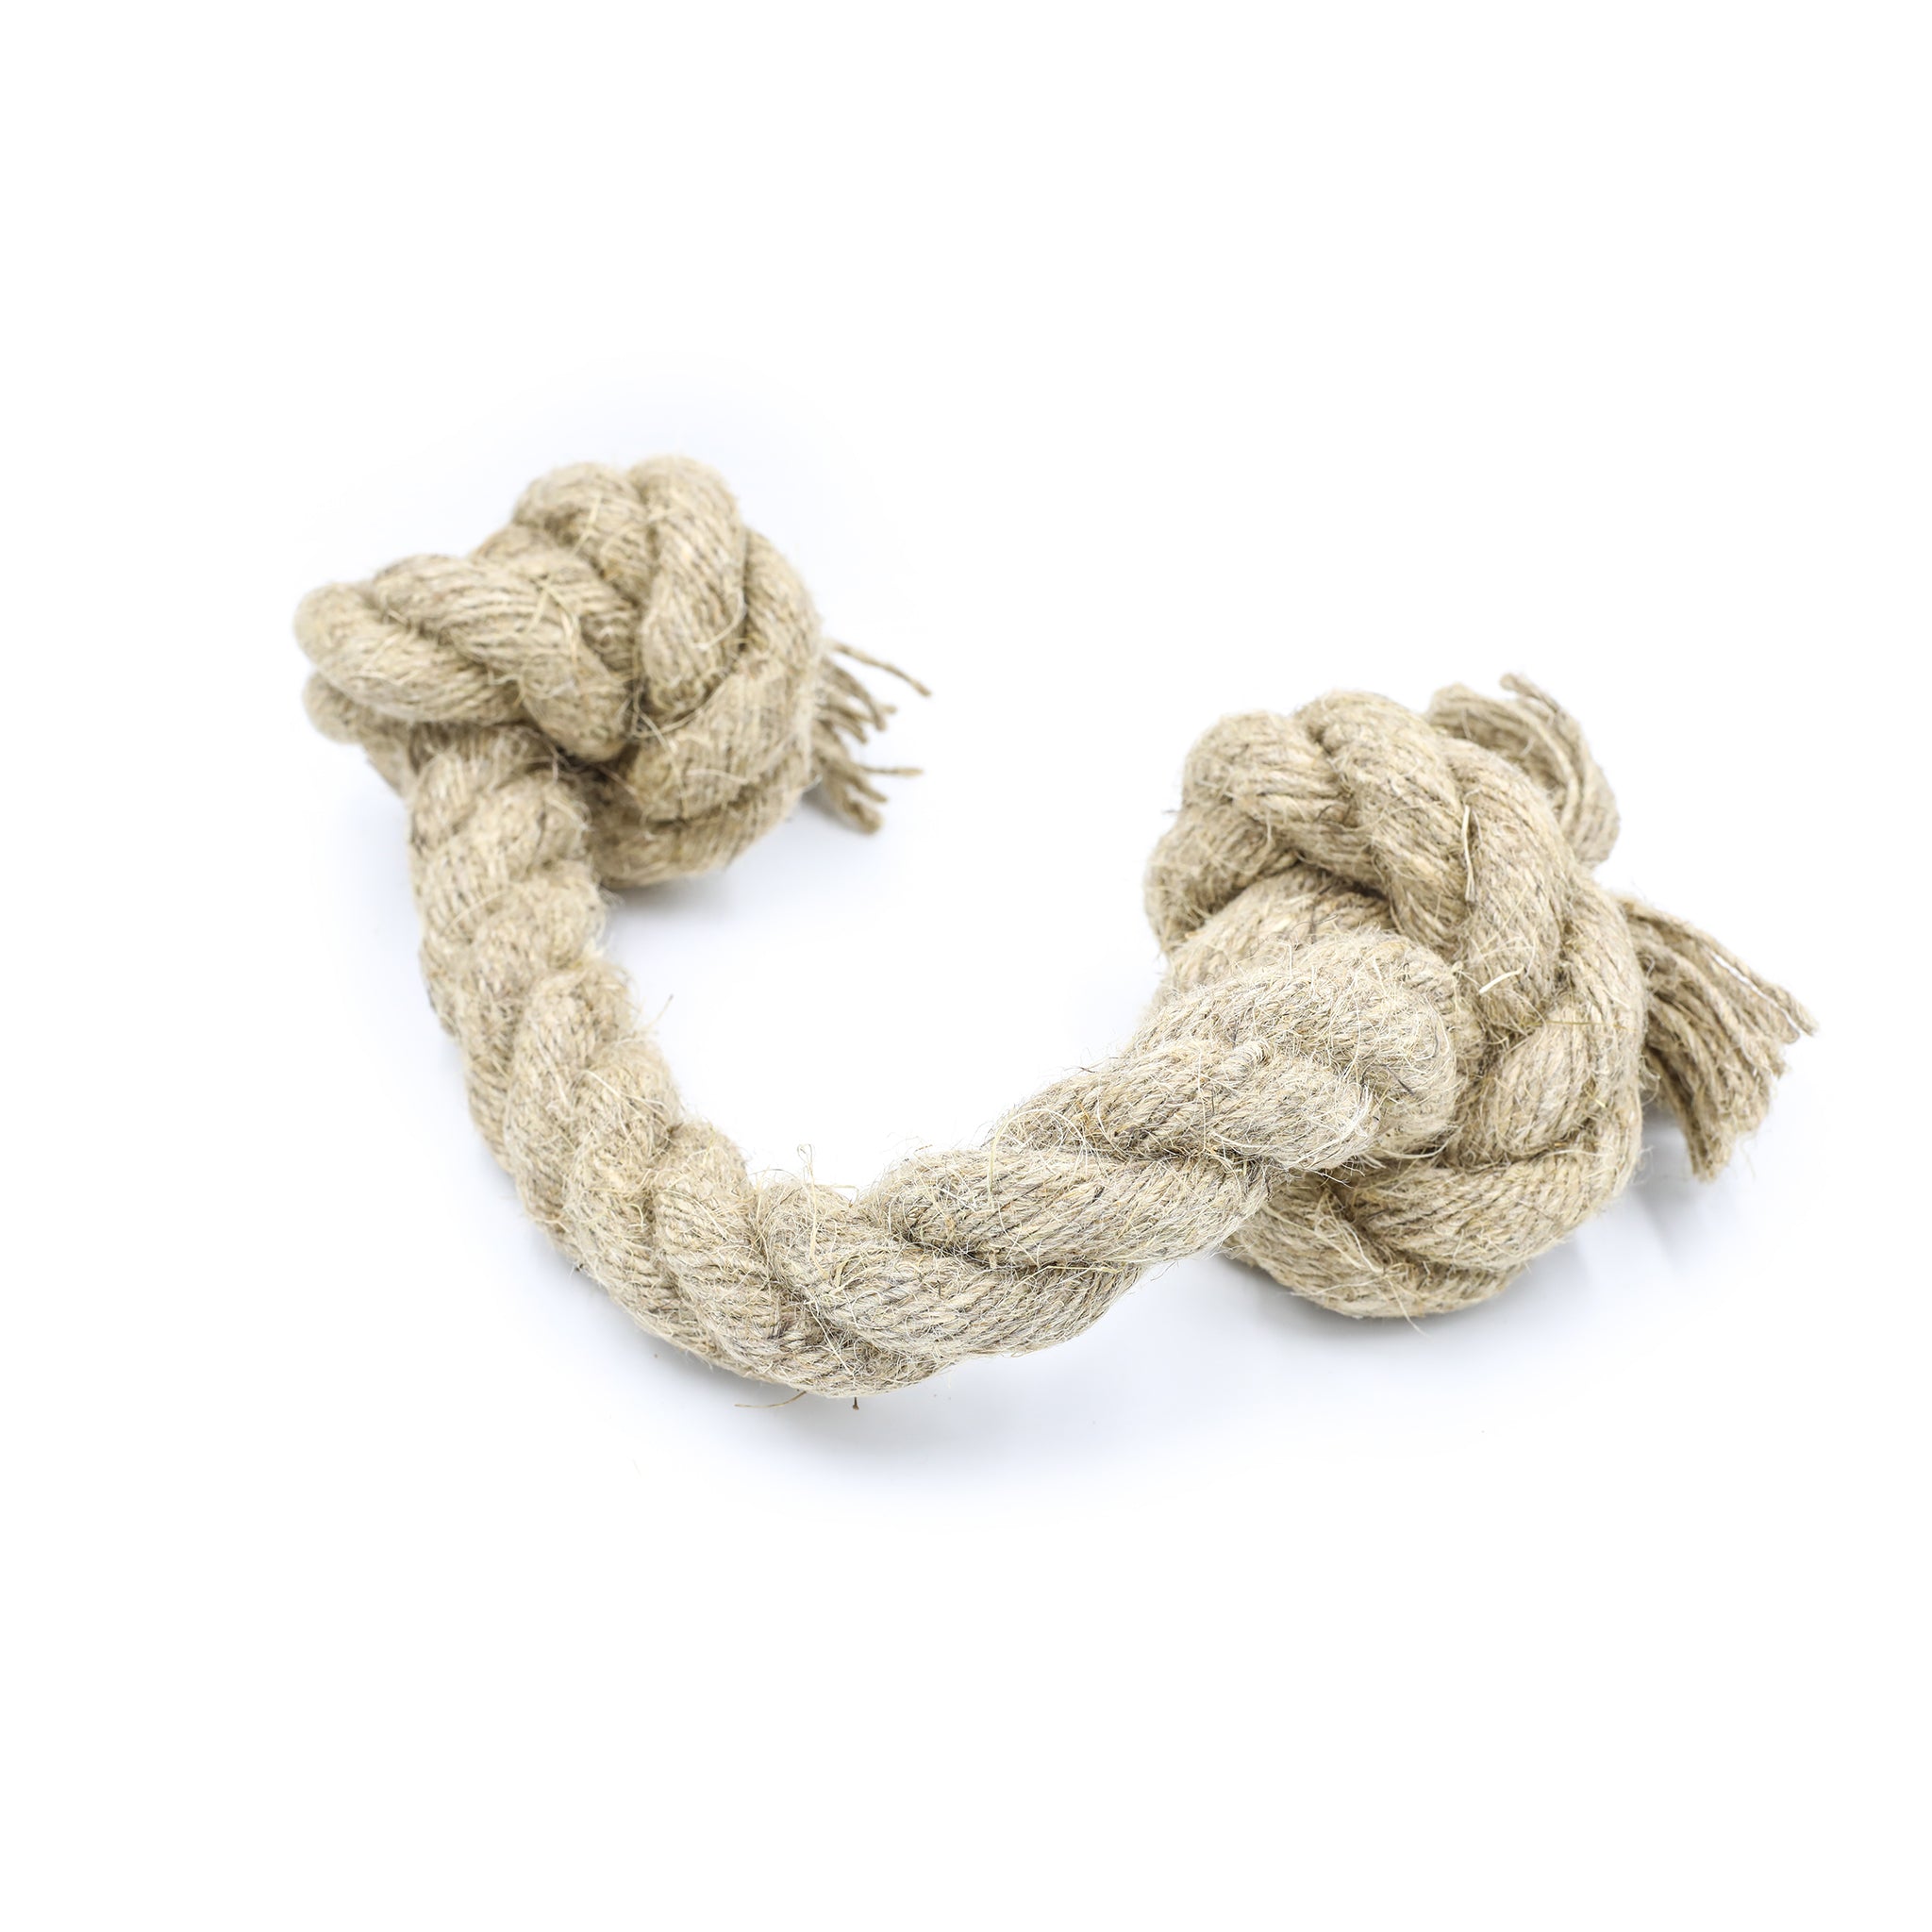 A large rope dog toy made of natural jute hemp material, The natural rope dog toy sits twisted on a white background